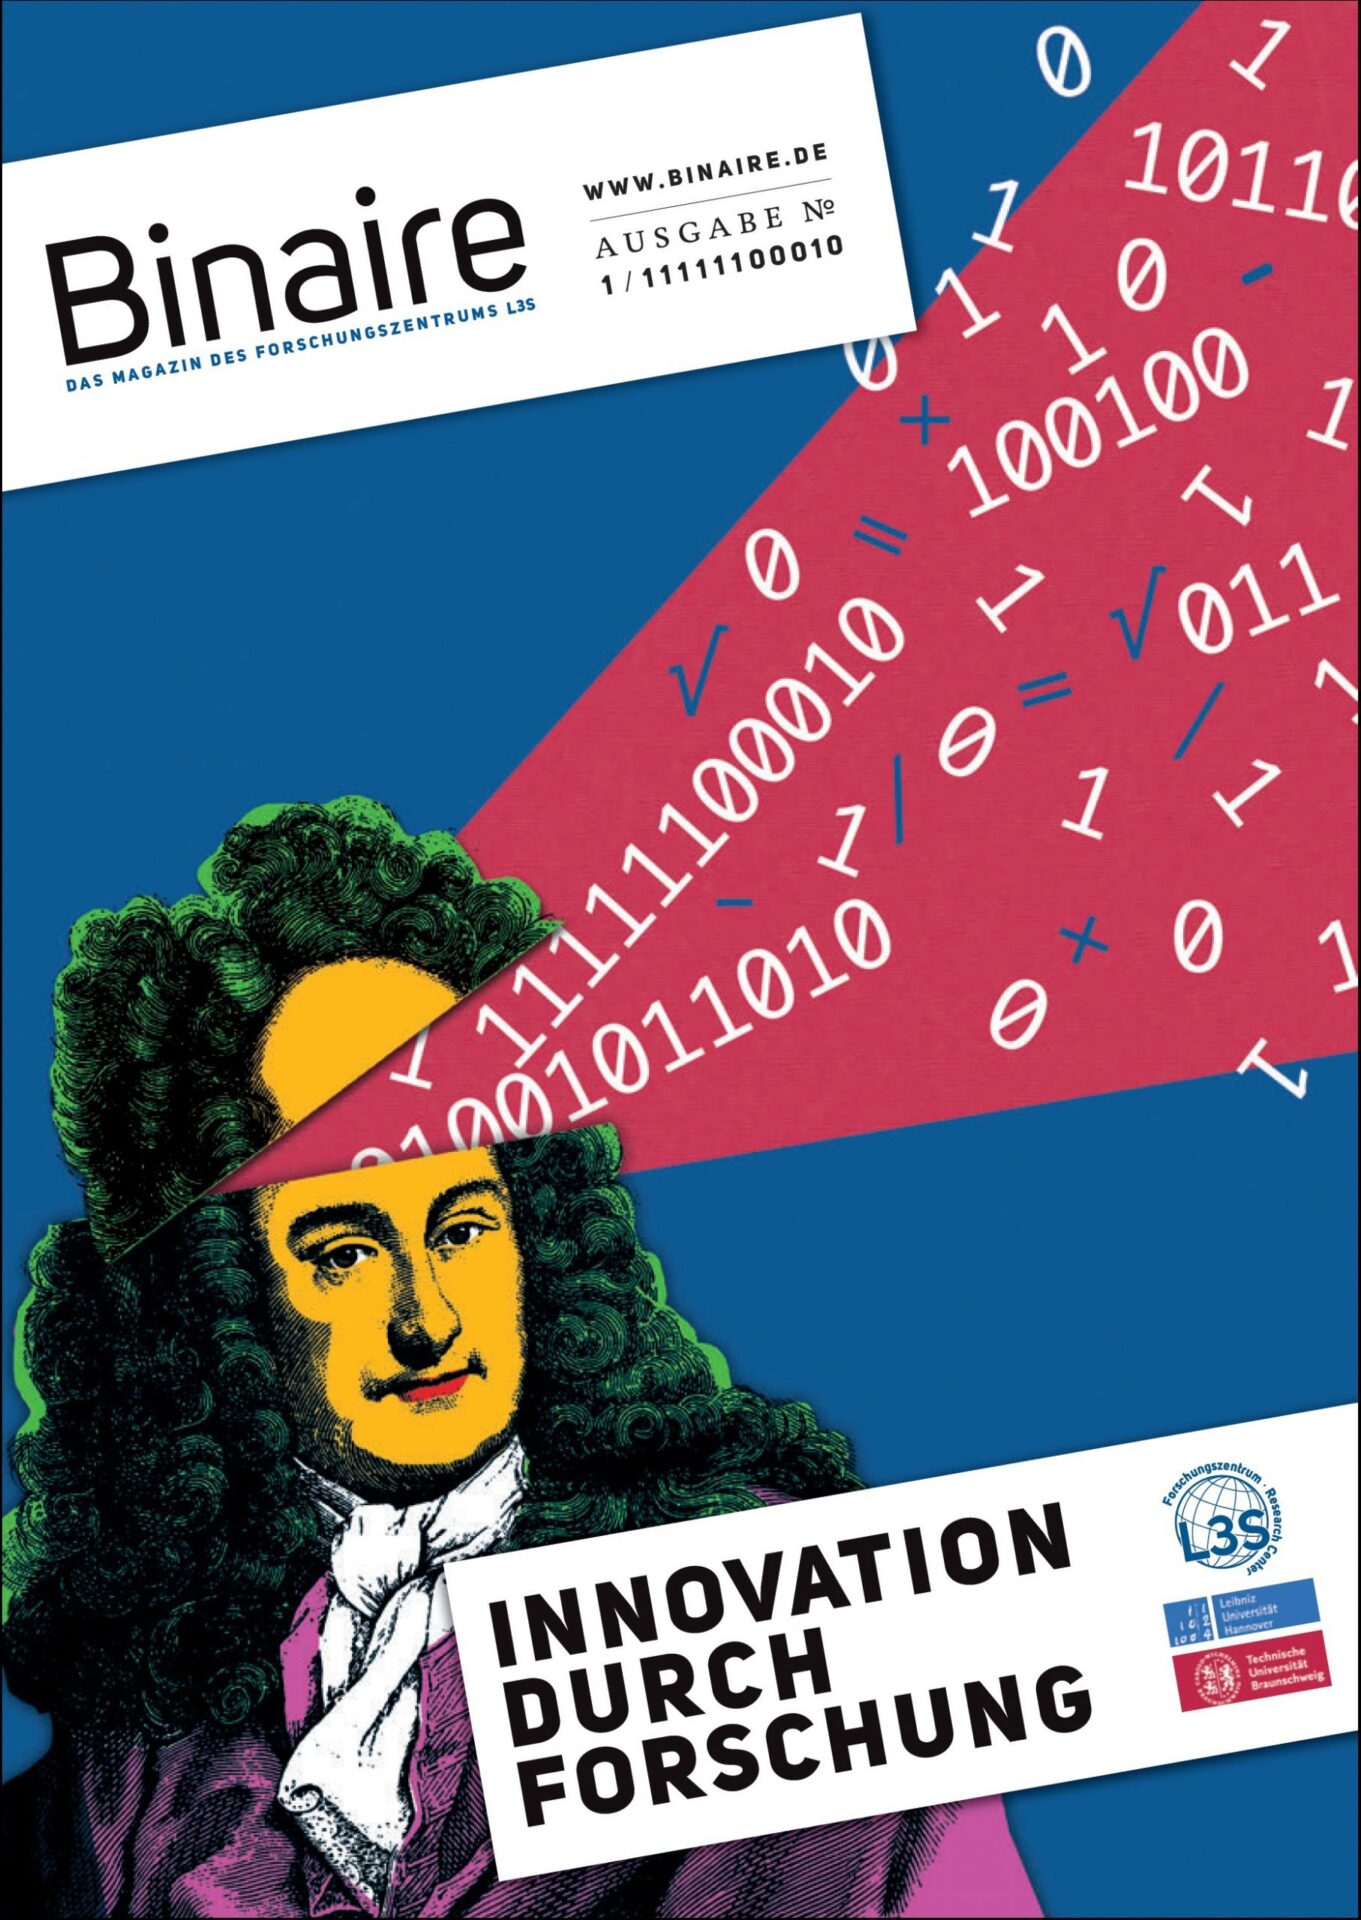 Binaire Title of the issue 2018-01 Innovation through Research